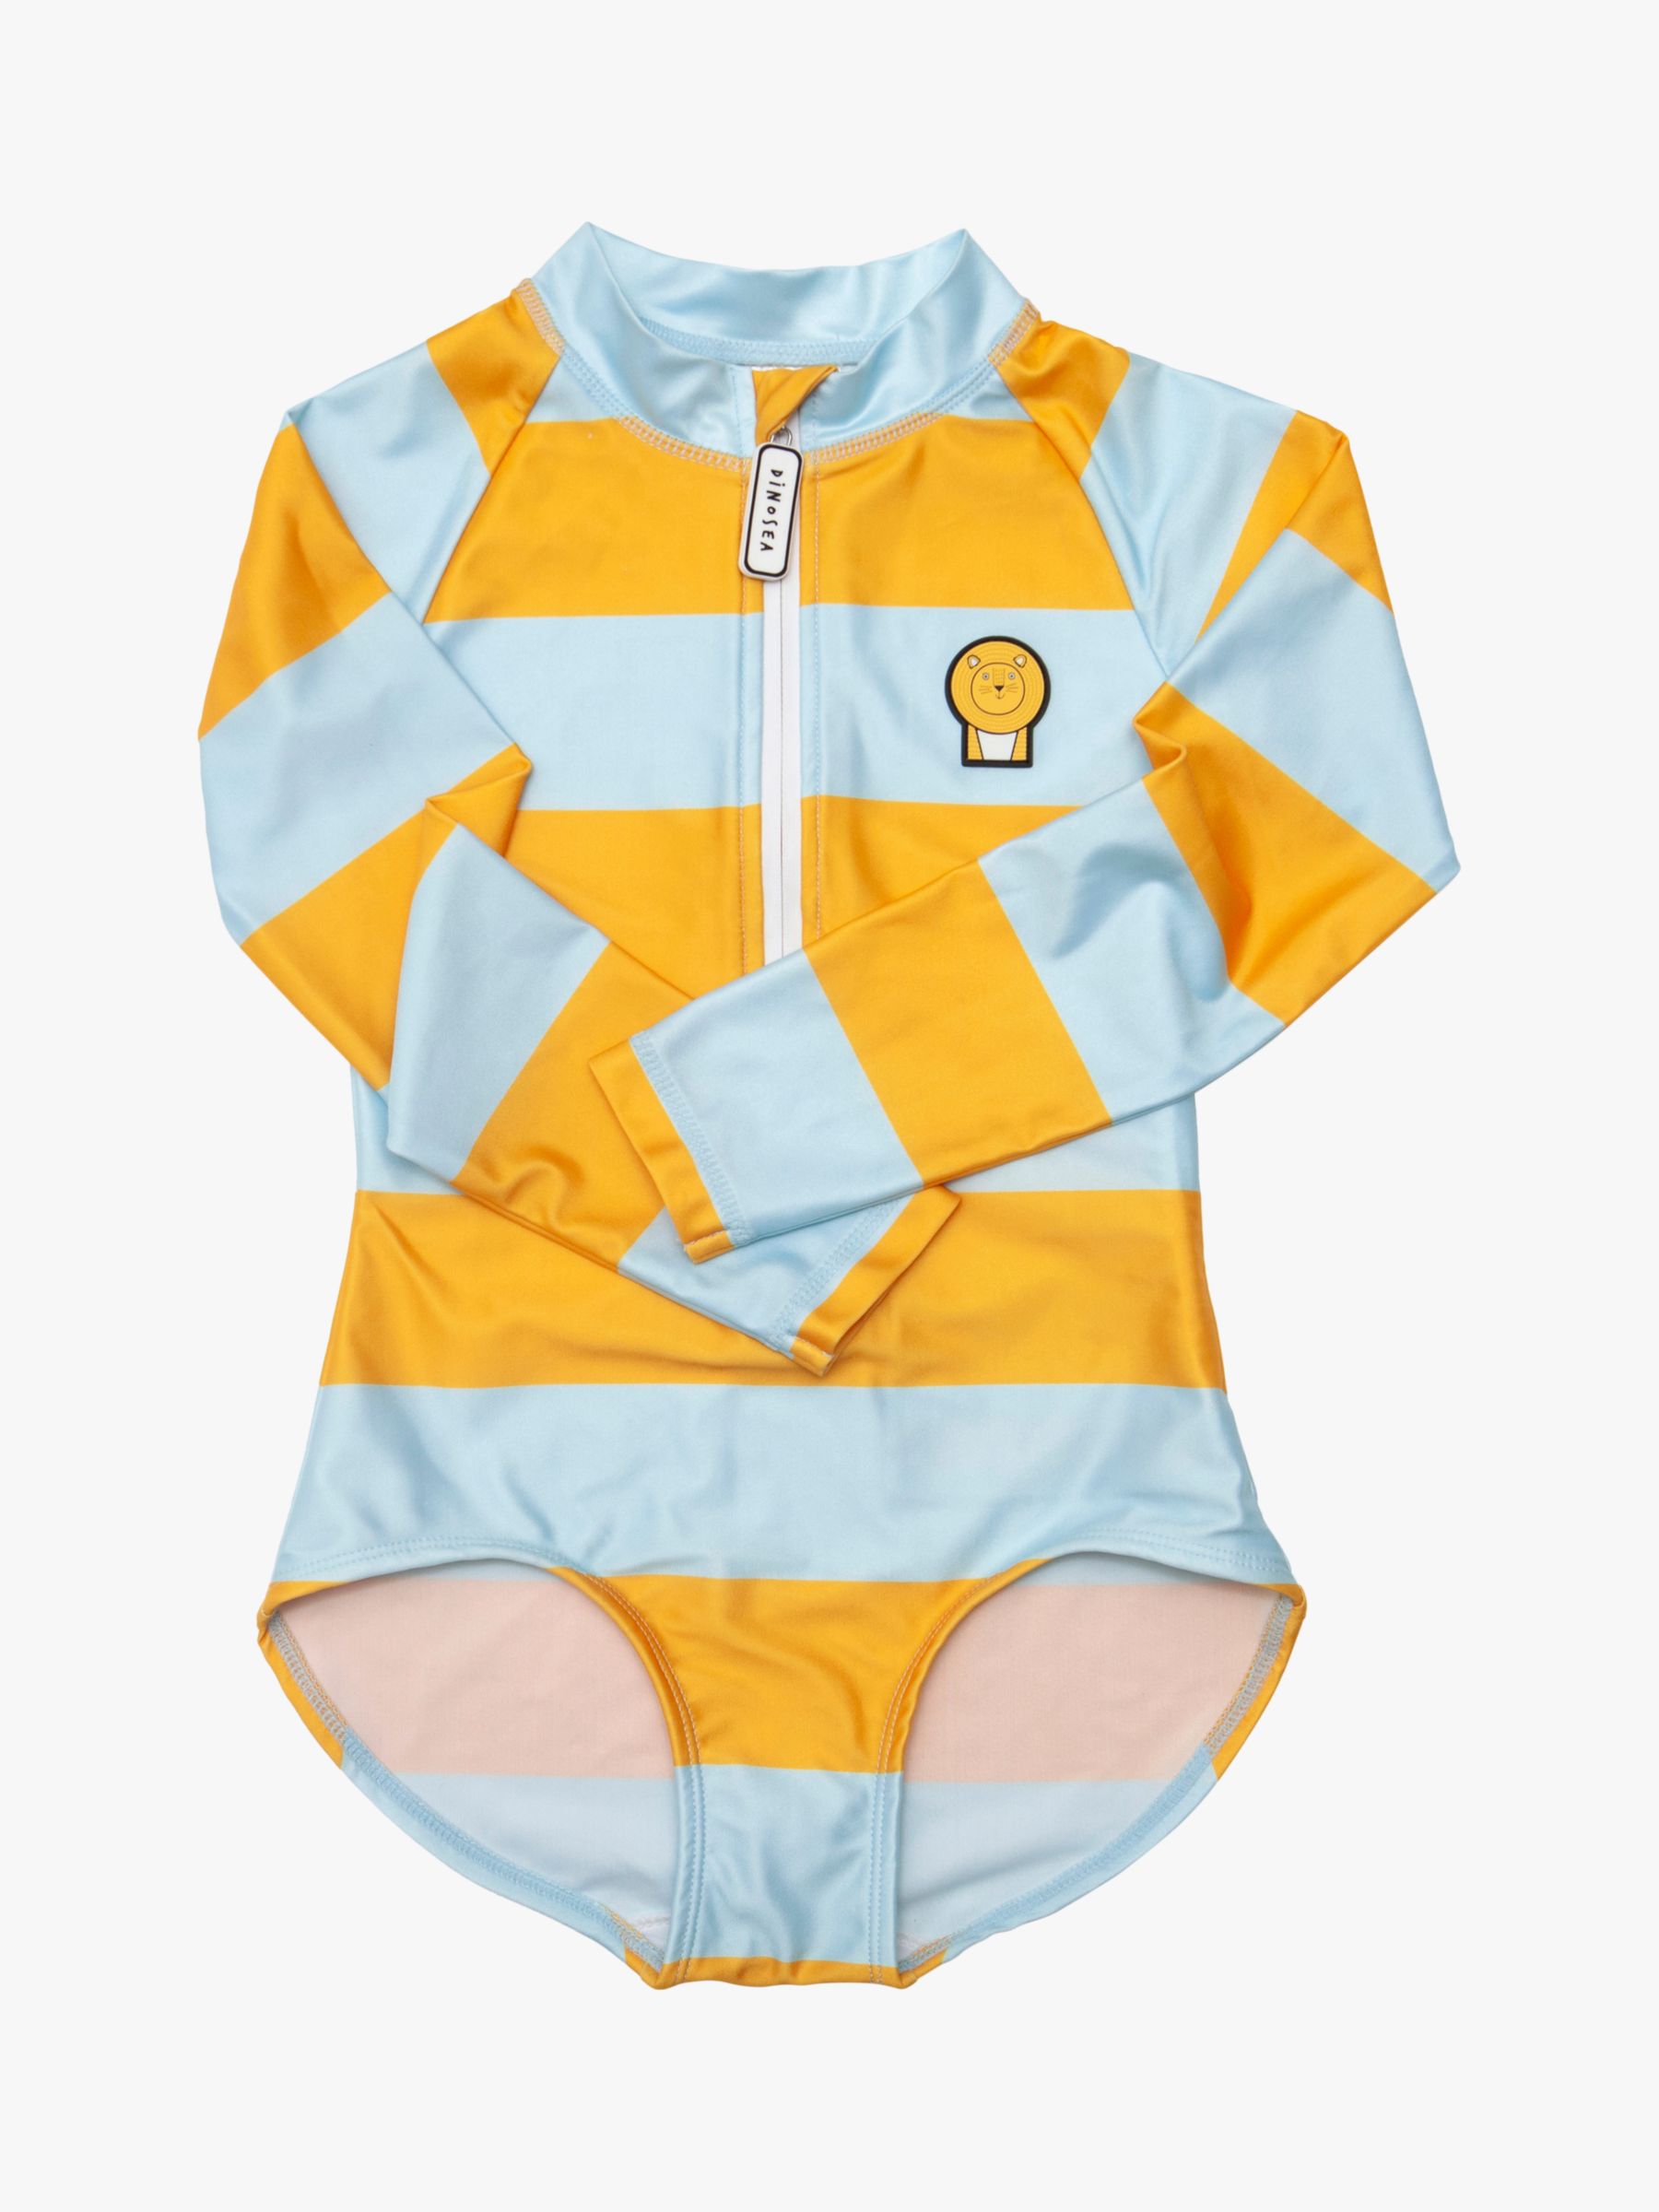 Roarsome Kids' Cub Striped Long Sleeve Swimsuit, Yellow/Blue, 1-2 years